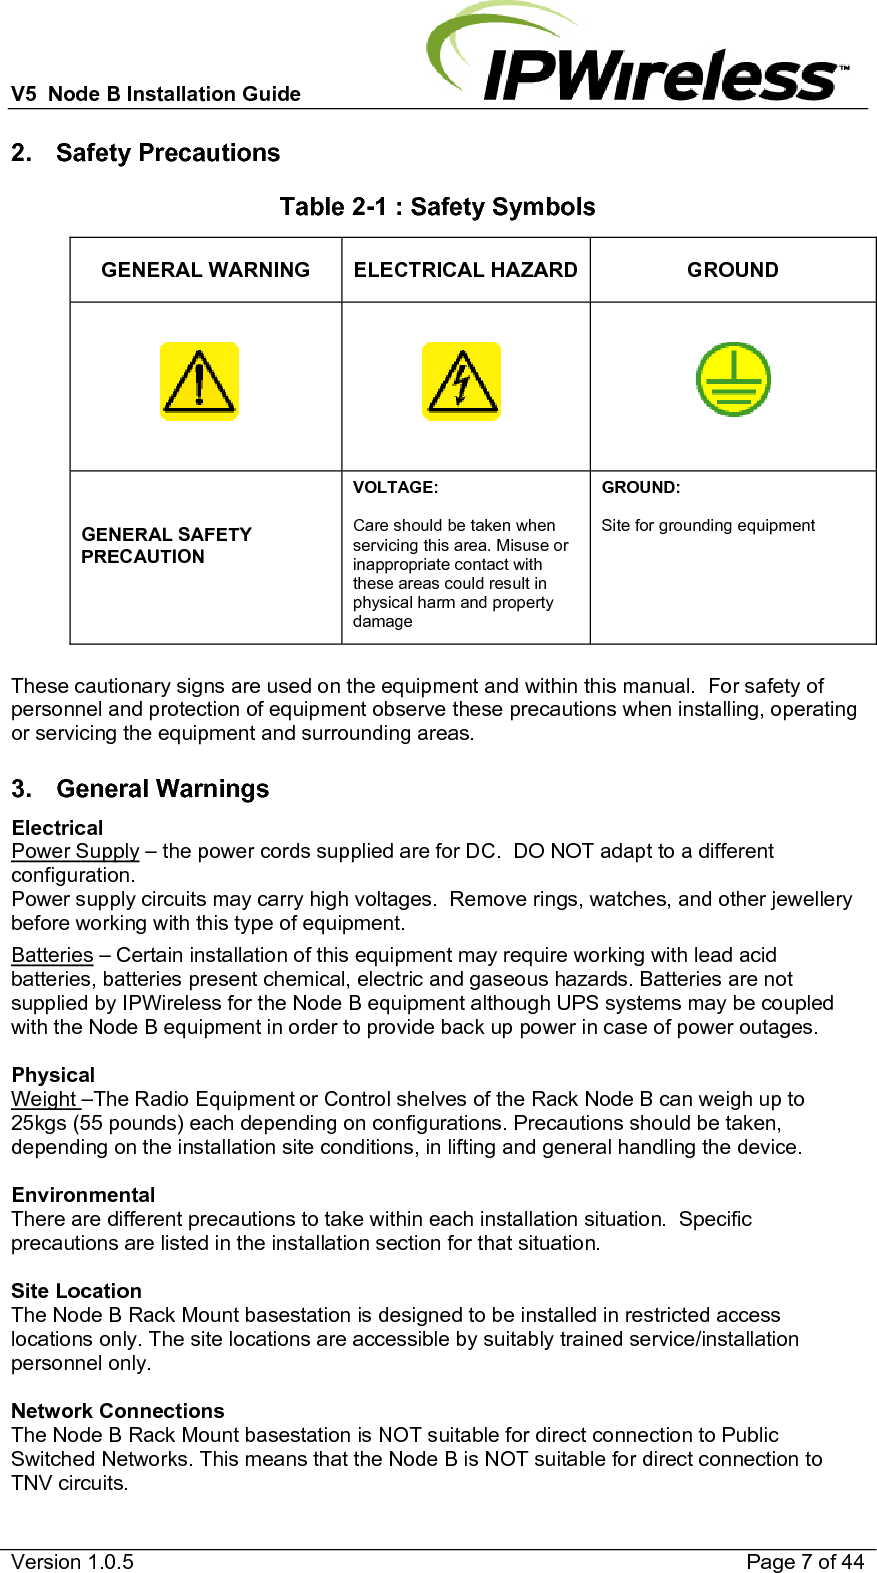 V5  Node B Installation Guide                           Version 1.0.5    Page 7 of 44 2. Safety Precautions Table 2-1 : Safety Symbols GENERAL WARNING  ELECTRICAL HAZARD GROUND    GENERAL SAFETY PRECAUTION  VOLTAGE:  Care should be taken when servicing this area. Misuse or inappropriate contact with these areas could result in physical harm and property damage GROUND:  Site for grounding equipment  These cautionary signs are used on the equipment and within this manual.  For safety of personnel and protection of equipment observe these precautions when installing, operating or servicing the equipment and surrounding areas.  3. General Warnings Electrical Power Supply – the power cords supplied are for DC.  DO NOT adapt to a different configuration. Power supply circuits may carry high voltages.  Remove rings, watches, and other jewellery before working with this type of equipment. Batteries – Certain installation of this equipment may require working with lead acid batteries, batteries present chemical, electric and gaseous hazards. Batteries are not supplied by IPWireless for the Node B equipment although UPS systems may be coupled with the Node B equipment in order to provide back up power in case of power outages.  Physical Weight –The Radio Equipment or Control shelves of the Rack Node B can weigh up to 25kgs (55 pounds) each depending on configurations. Precautions should be taken, depending on the installation site conditions, in lifting and general handling the device.  Environmental There are different precautions to take within each installation situation.  Specific precautions are listed in the installation section for that situation.  Site Location The Node B Rack Mount basestation is designed to be installed in restricted access locations only. The site locations are accessible by suitably trained service/installation personnel only.  Network Connections The Node B Rack Mount basestation is NOT suitable for direct connection to Public Switched Networks. This means that the Node B is NOT suitable for direct connection to TNV circuits. 